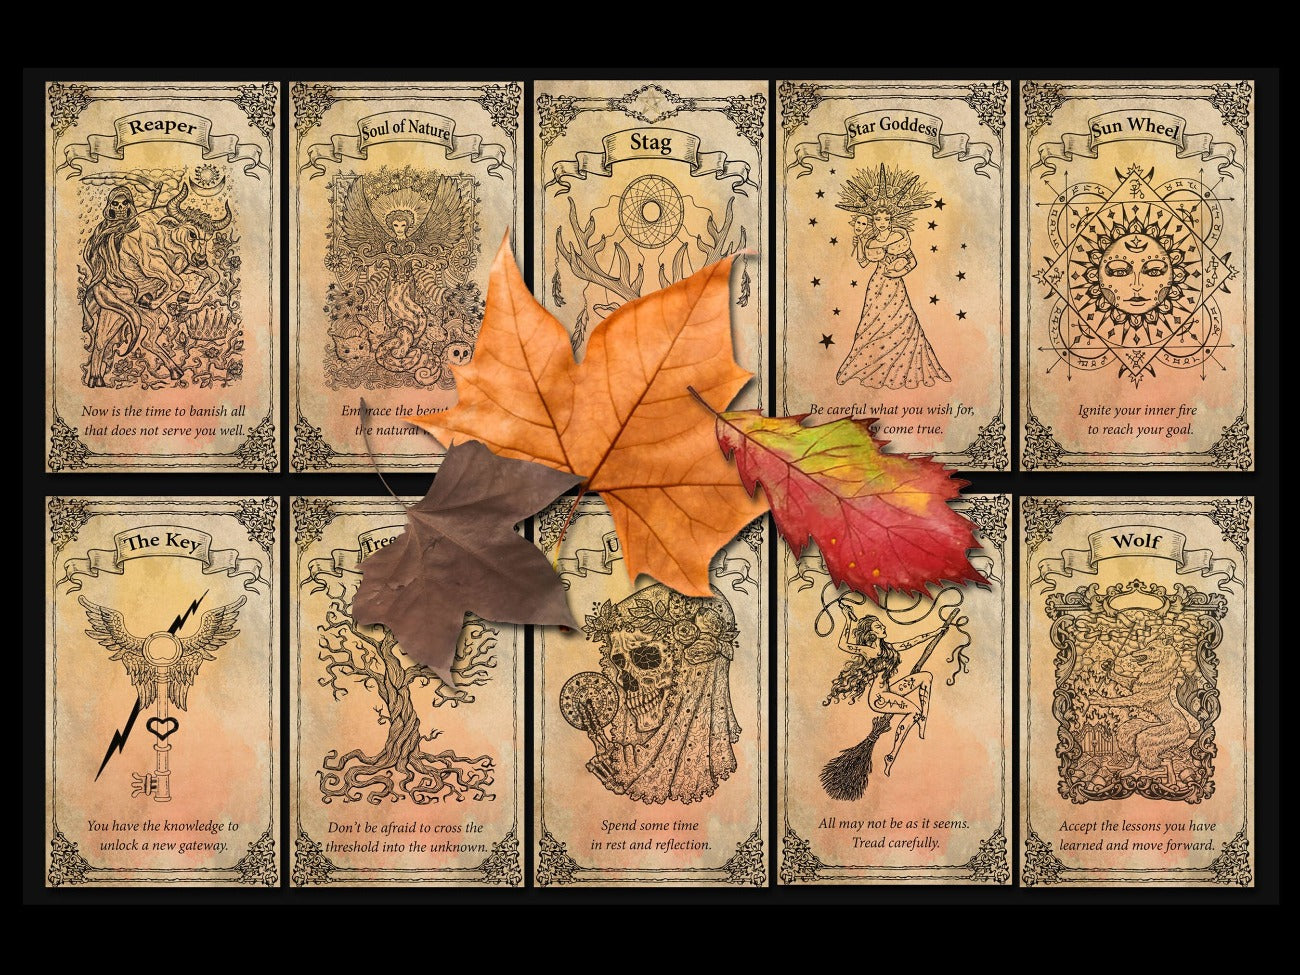 20 Mabon Sabbat Oracle Cards with Celtic borders, assorted Mabon related pictures with inspirational text.